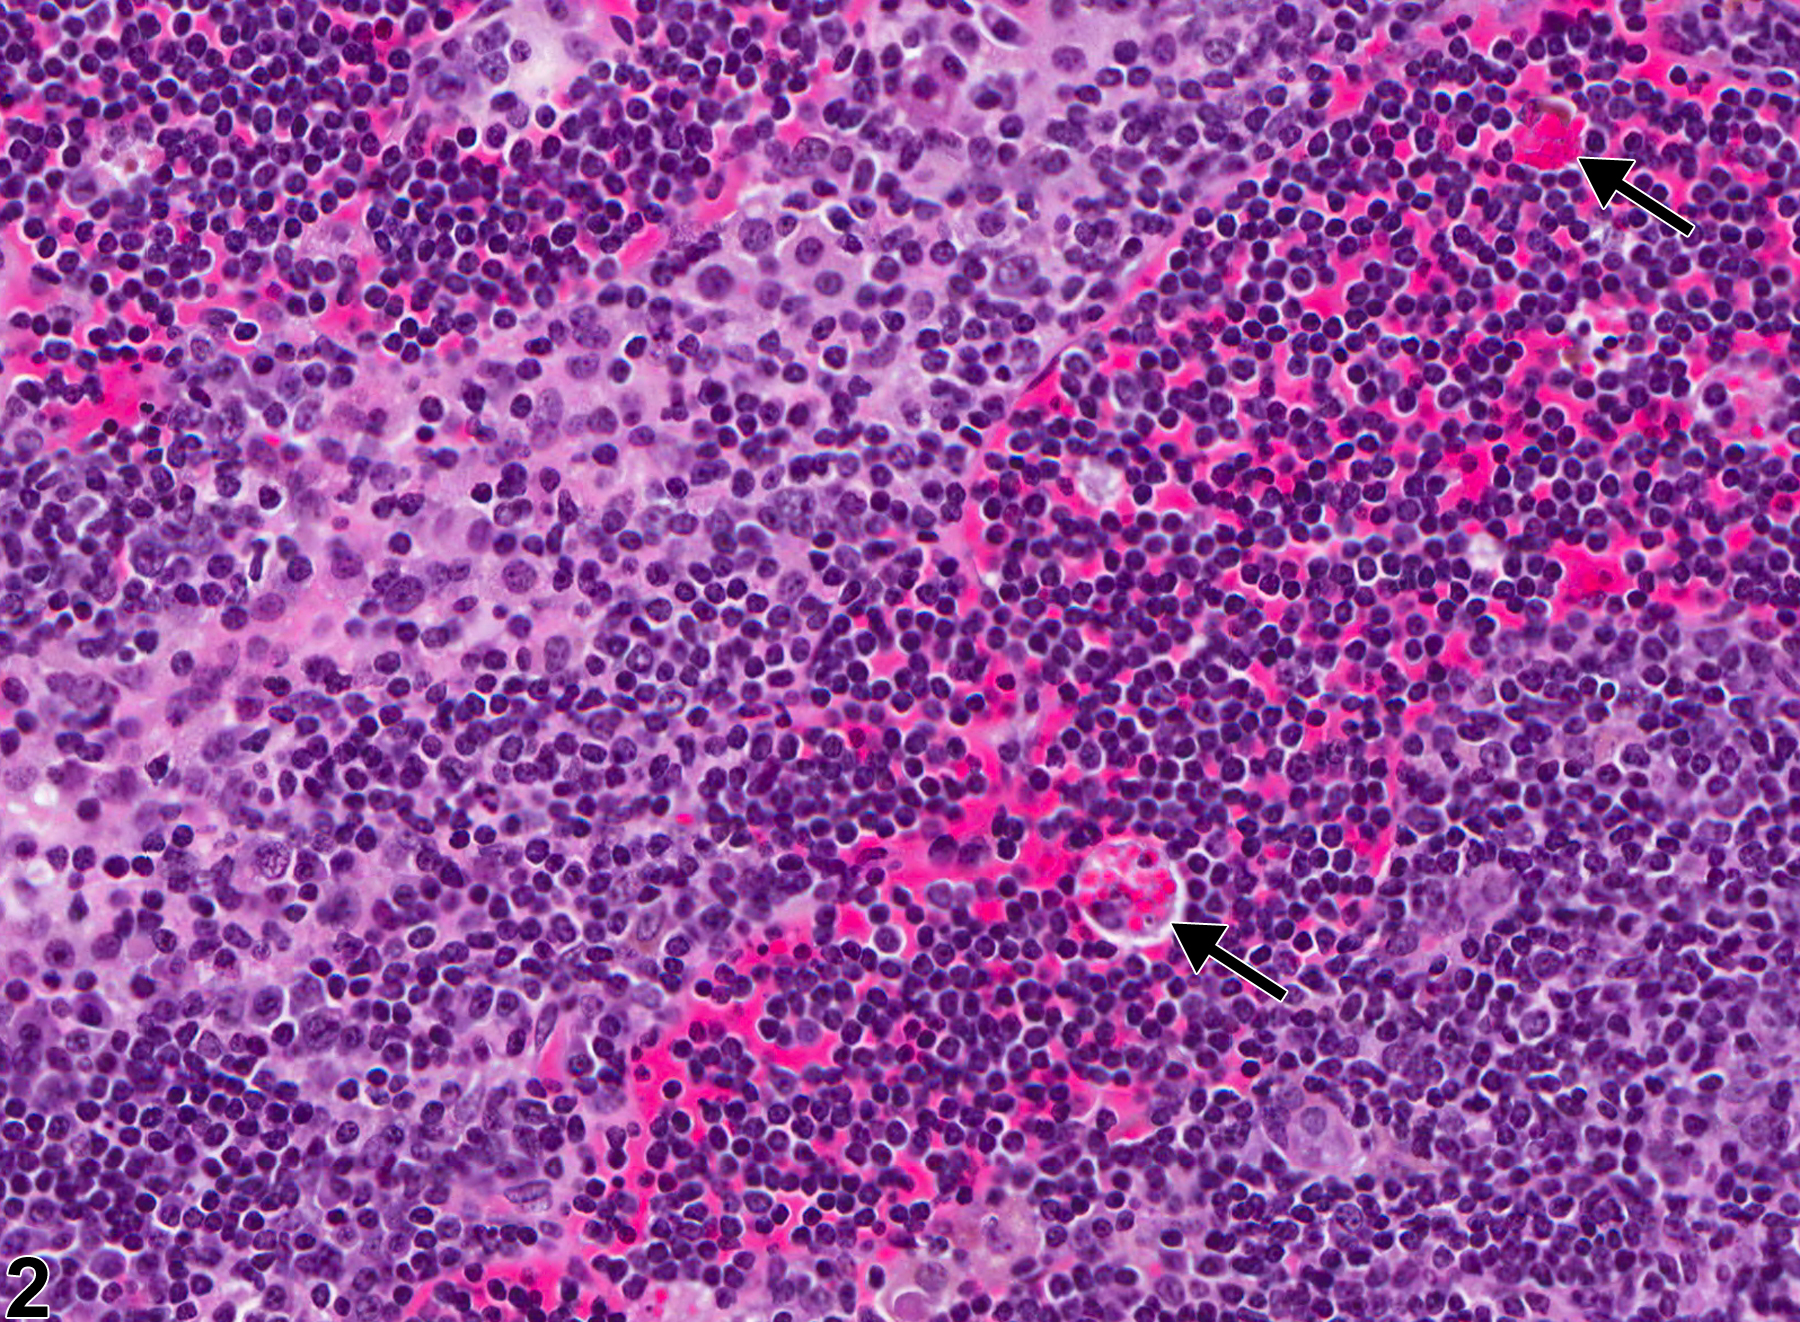 Image of hemorrhage in the thymus from a female B6C3F1/N mouse in a chronic study